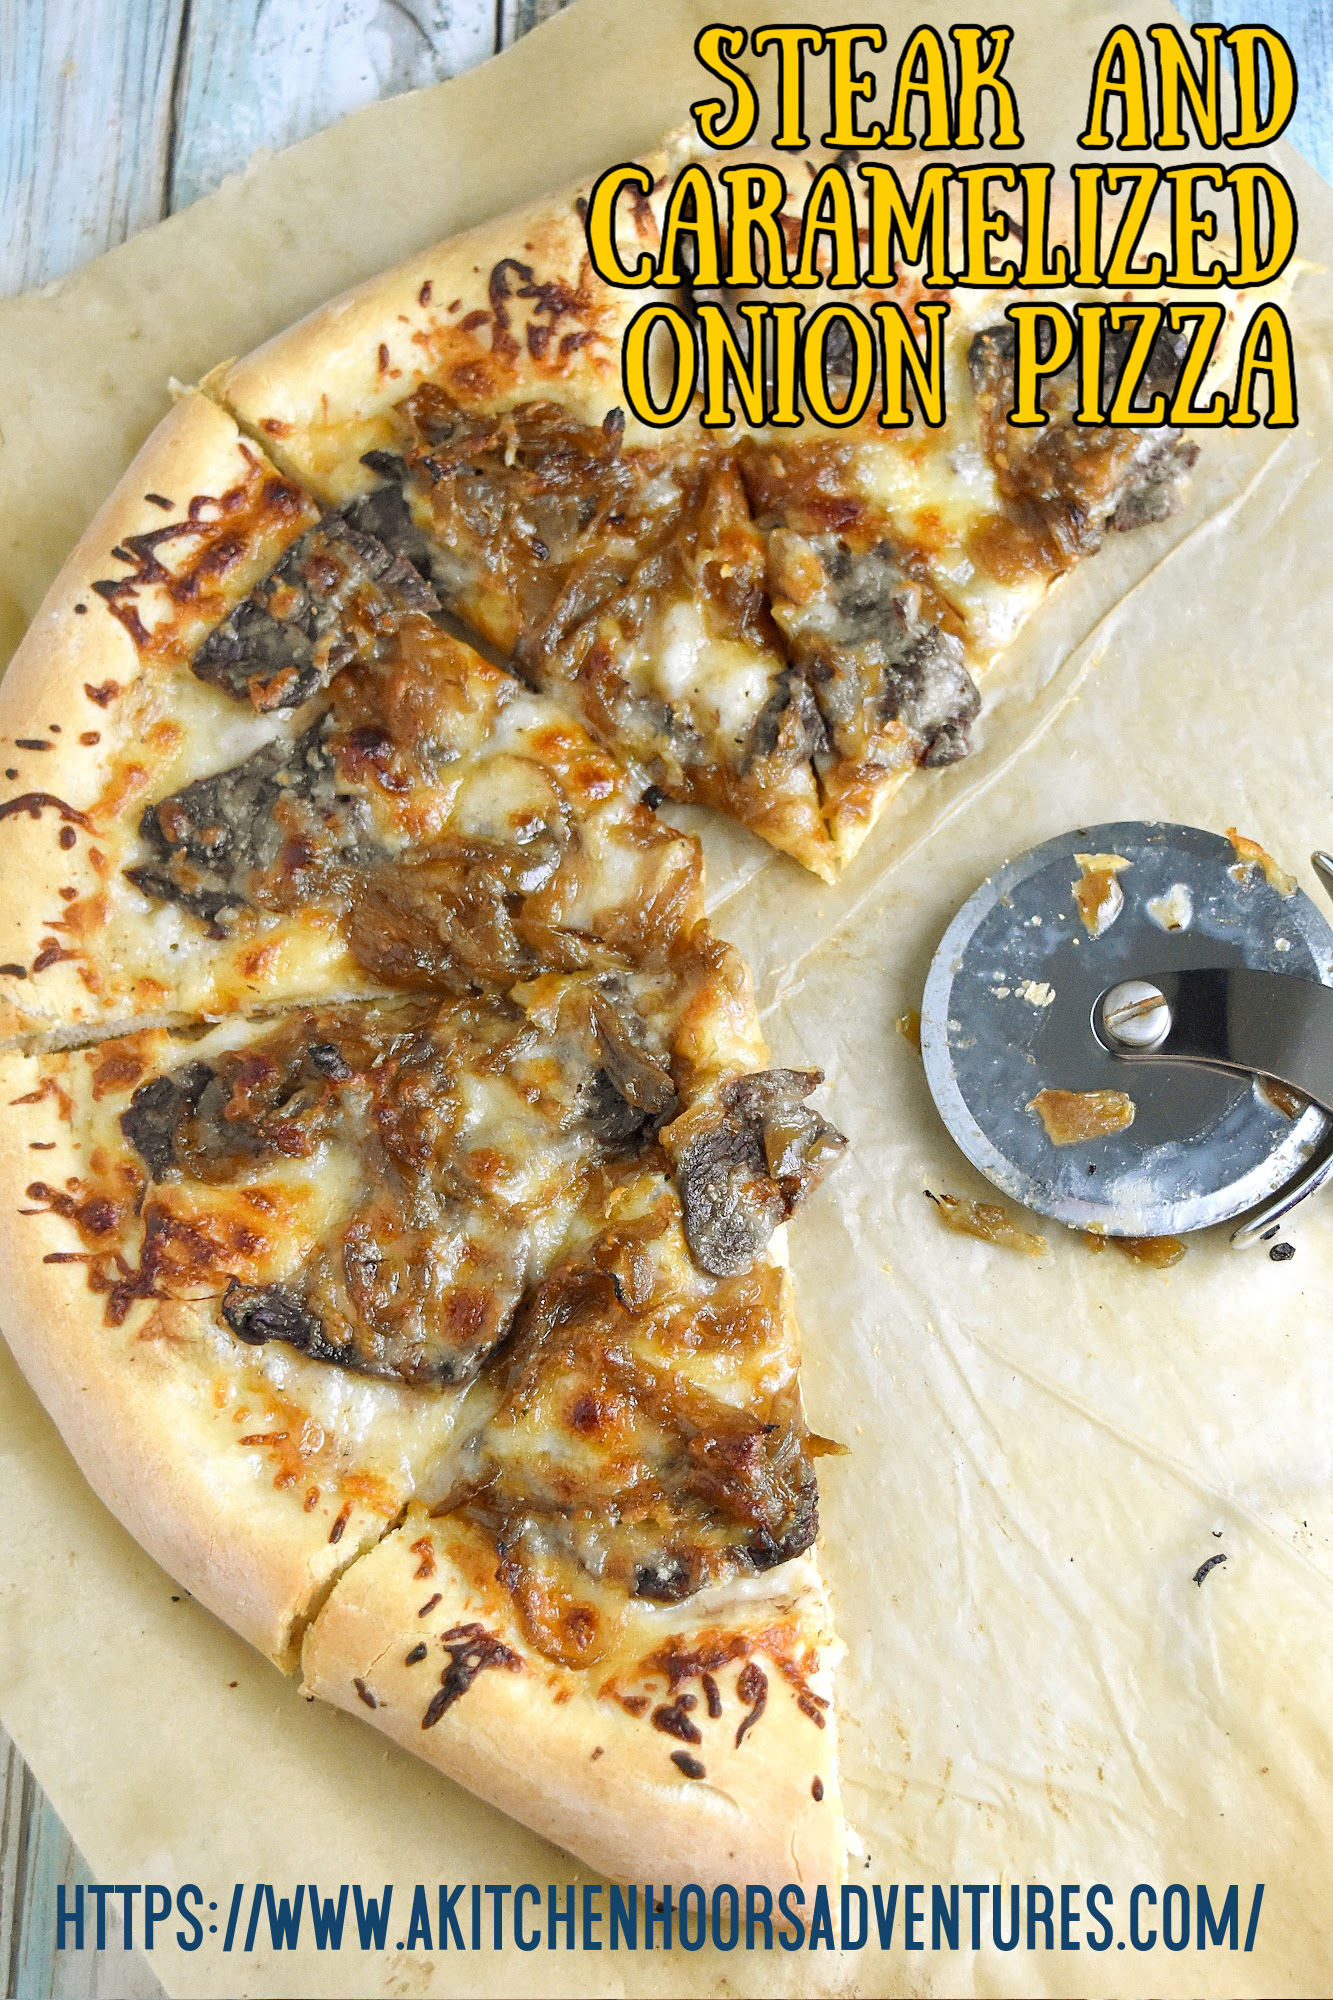 /Steak and Caramelized Onion Pizza is simple to make. The steak is cooked on the pizza which makes it tender and delicious with the caramelized onions. #OurFamilyTable #pizza #steakpizza #caramelizedonionpizza #steakandonions